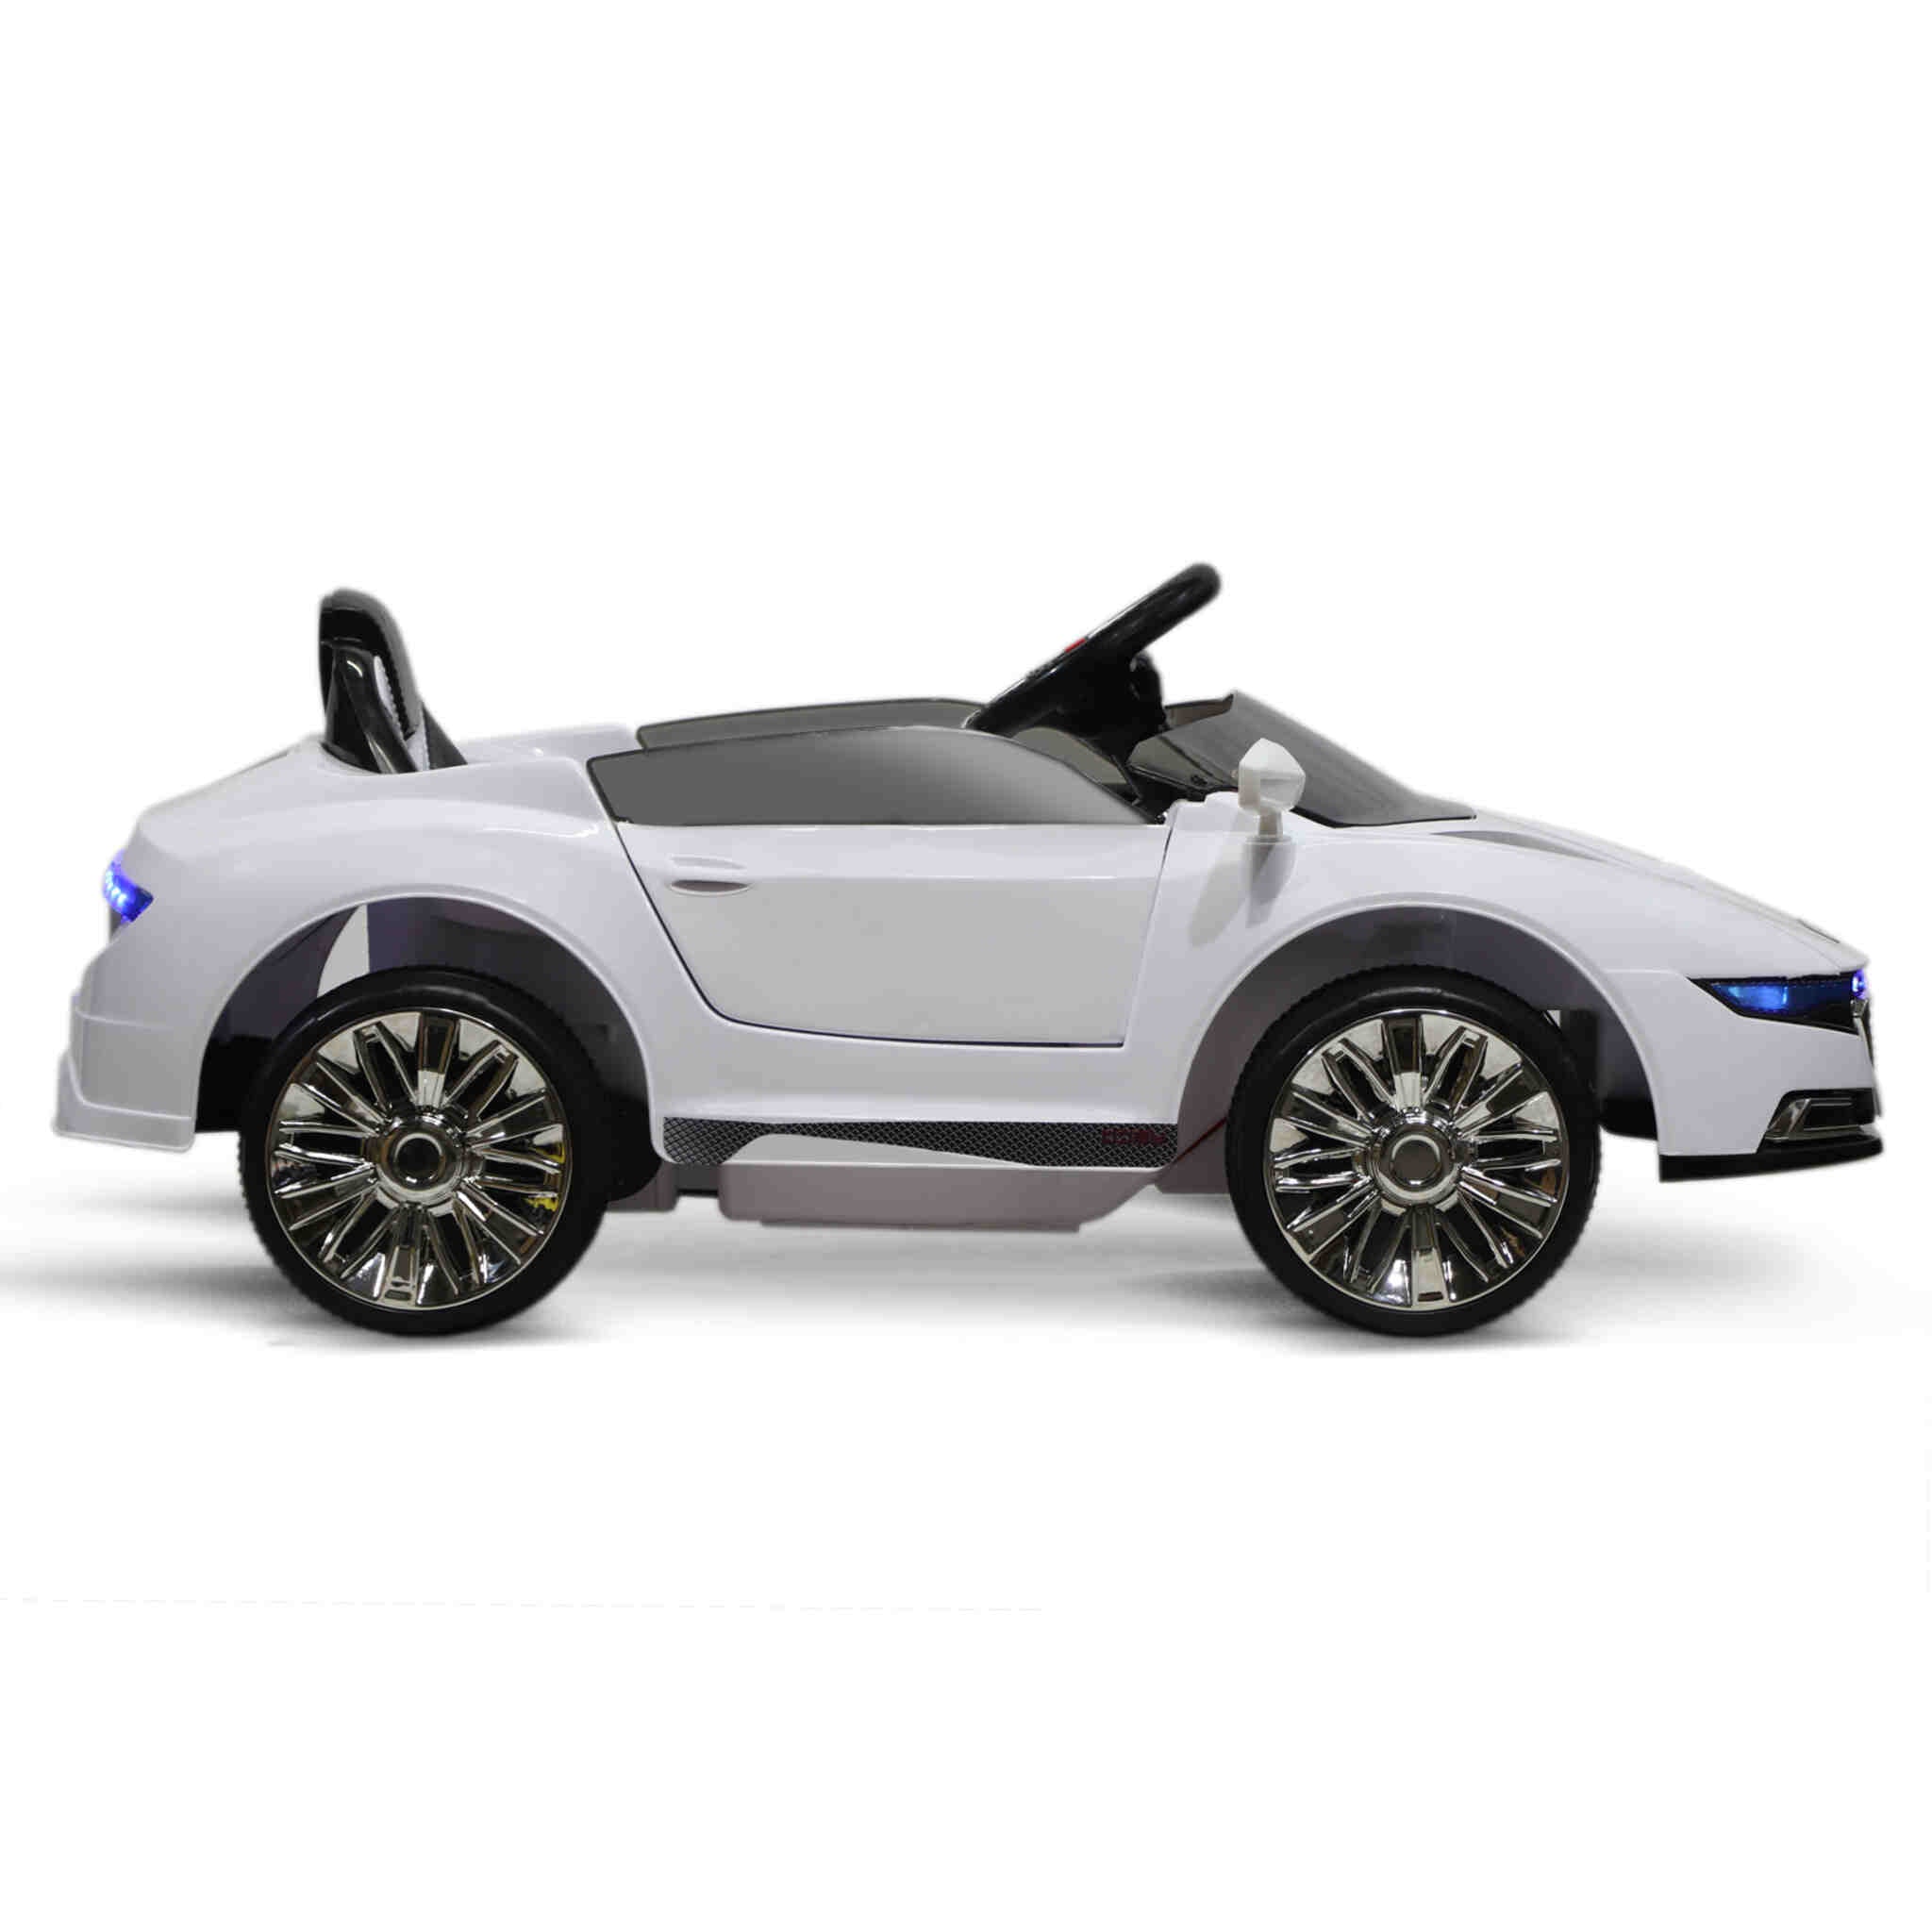 Audi AD R Coupe - lizensiertes Kinderauto - MabeaMobility